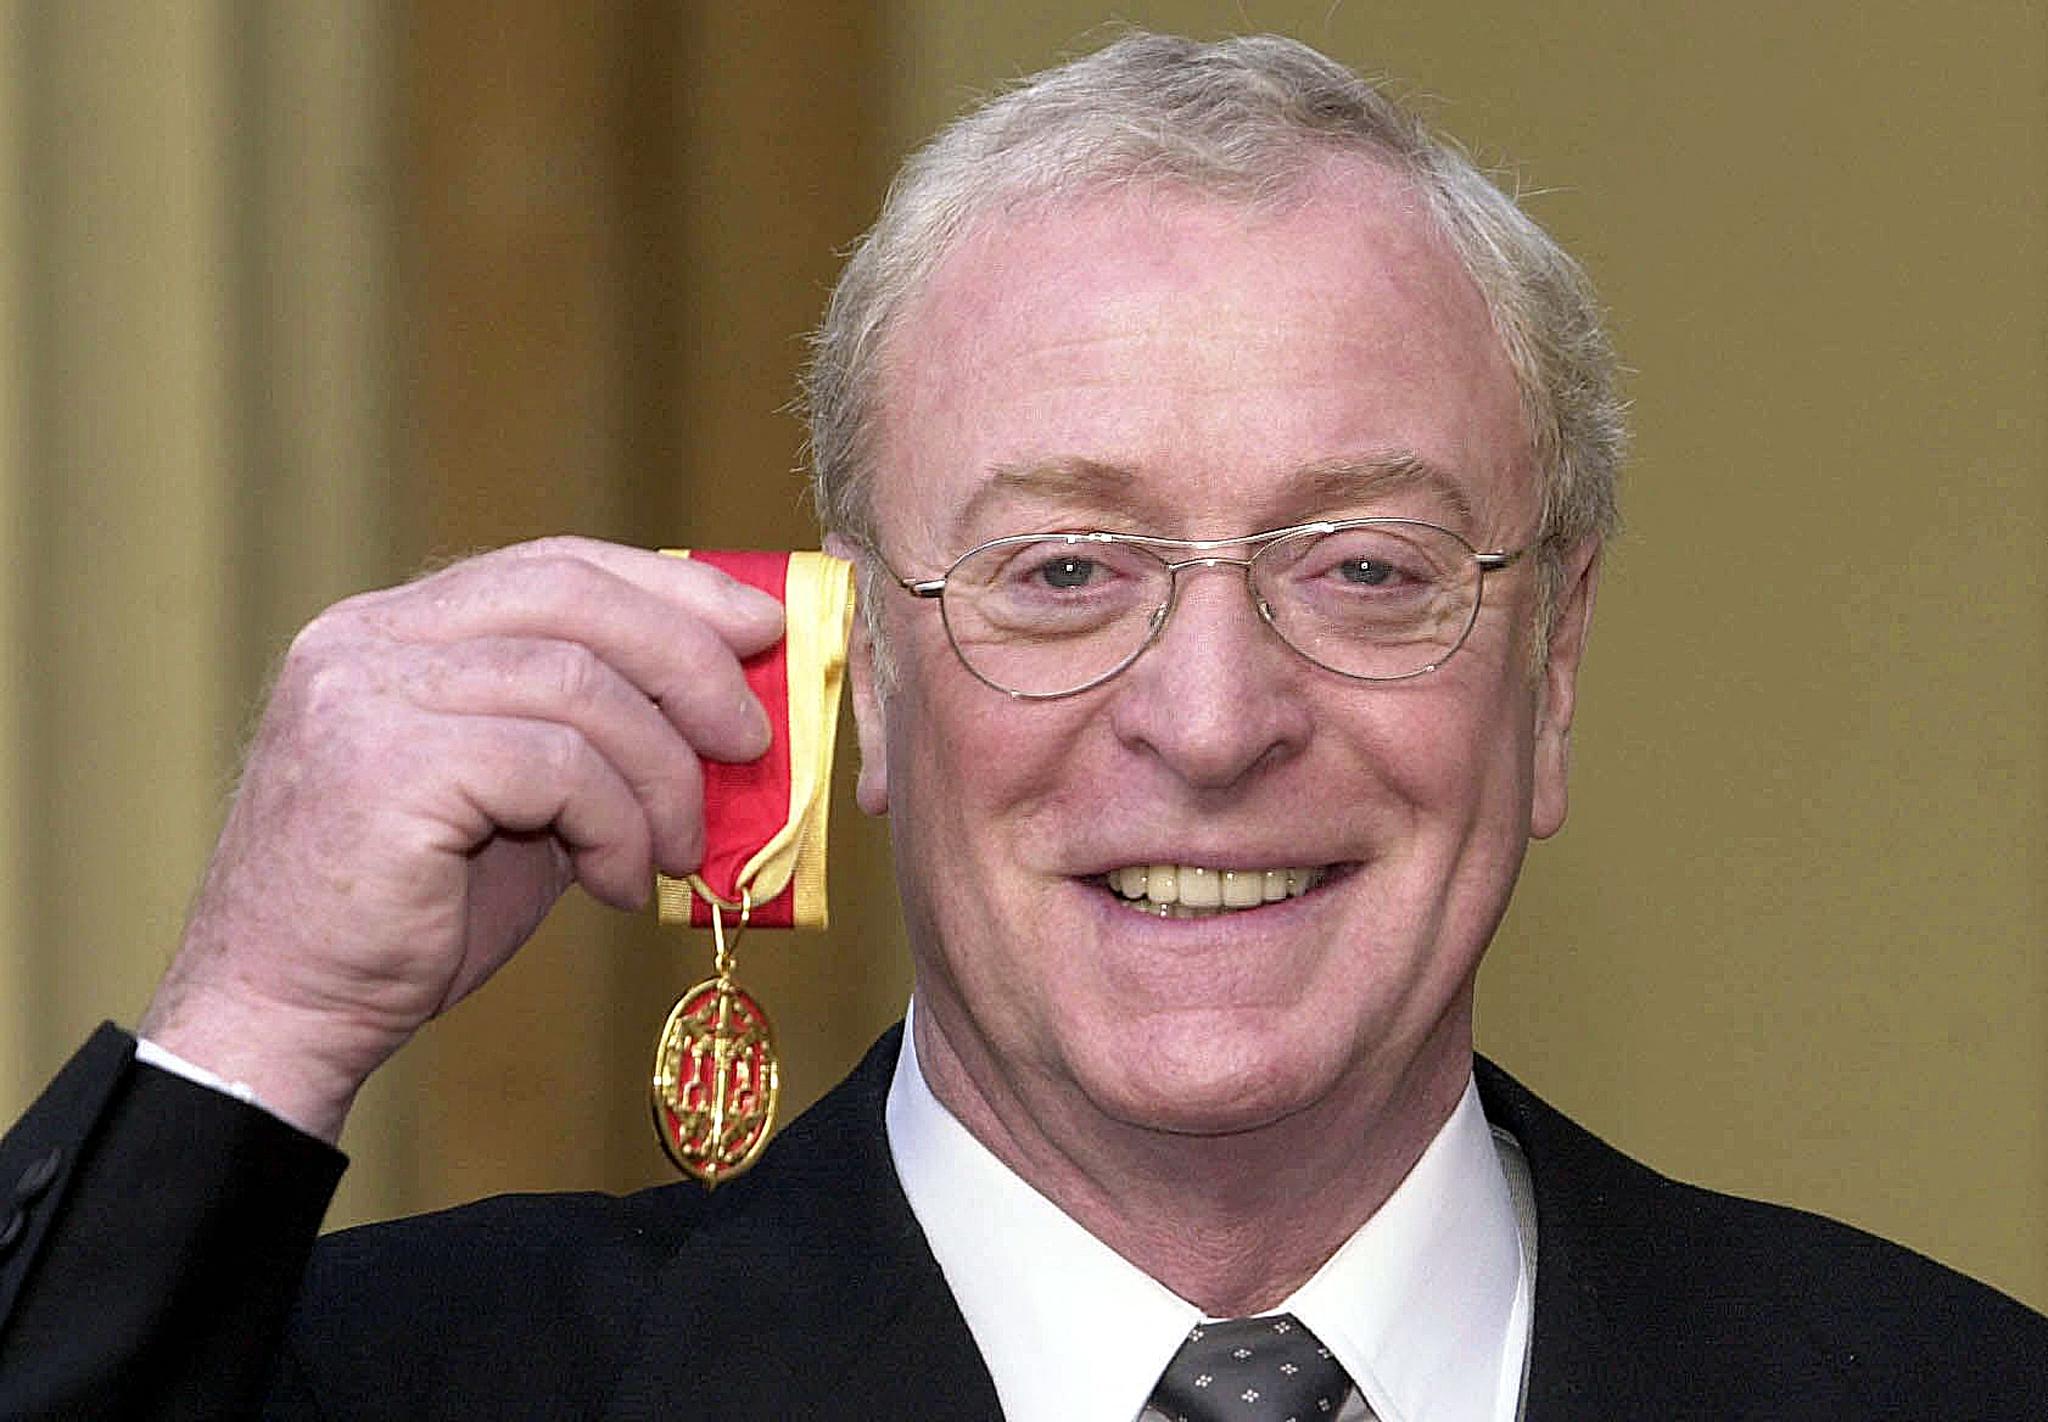 Michael Caine pictured displaying a knighthood he received from Britain's Queen Elizabeth II at Buckingham Palace on 16 November 2000 in London. / Source: Getty Images